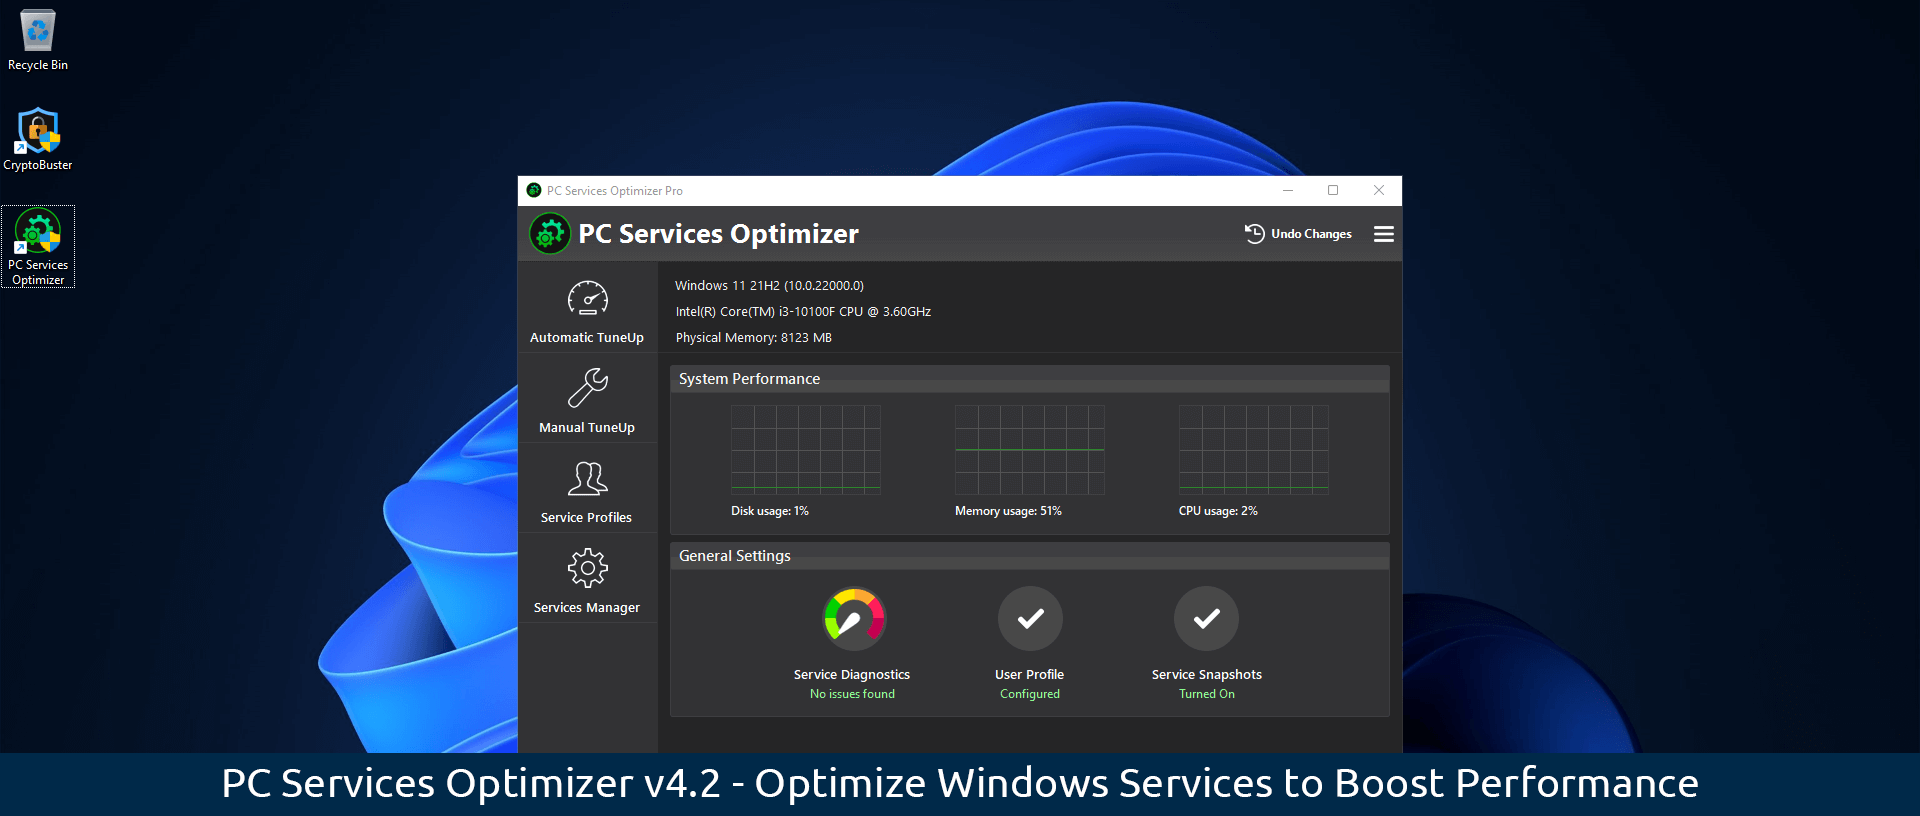 Optimize Windows Services to Boost Performance with PC Services Optimizer 4.2